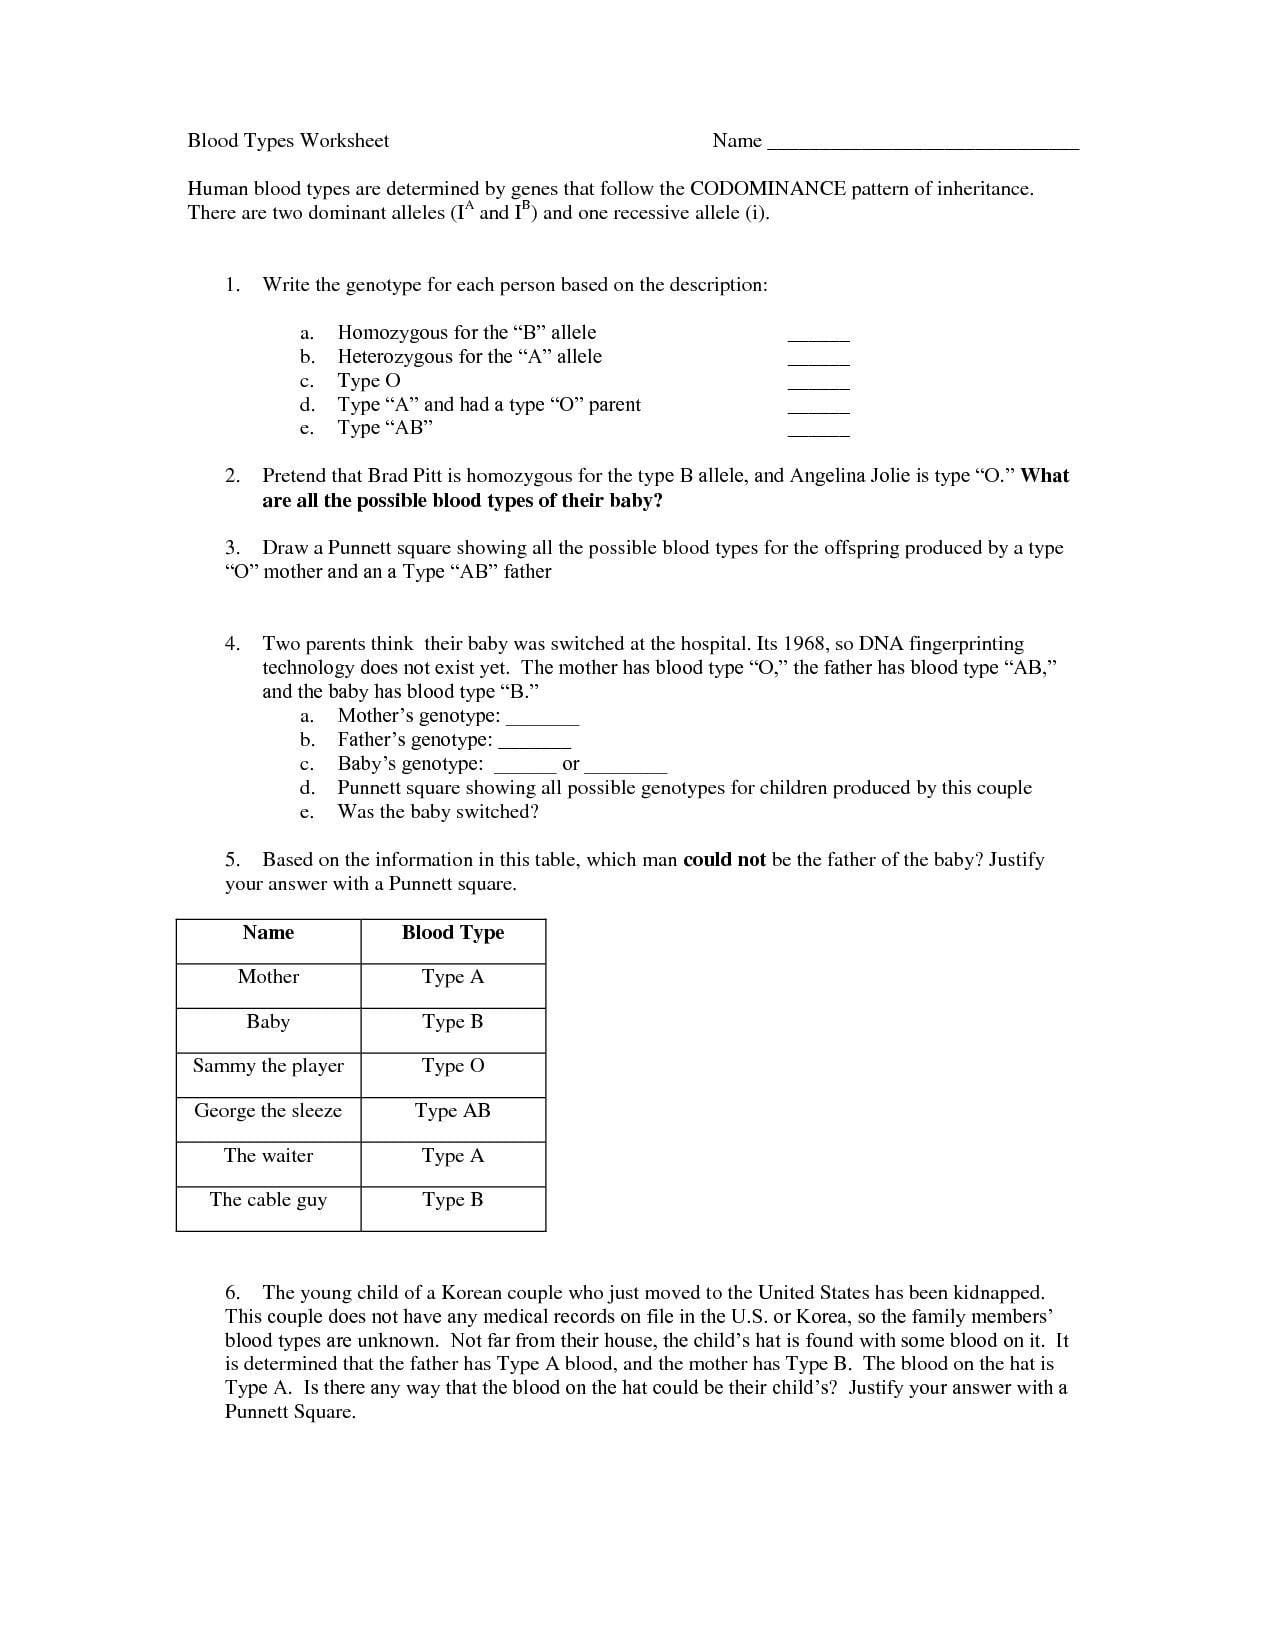 Sickle Cell Anemia Pedigree Worksheet  Briefencounters Throughout Sickle Cell Anemia Worksheet Answers